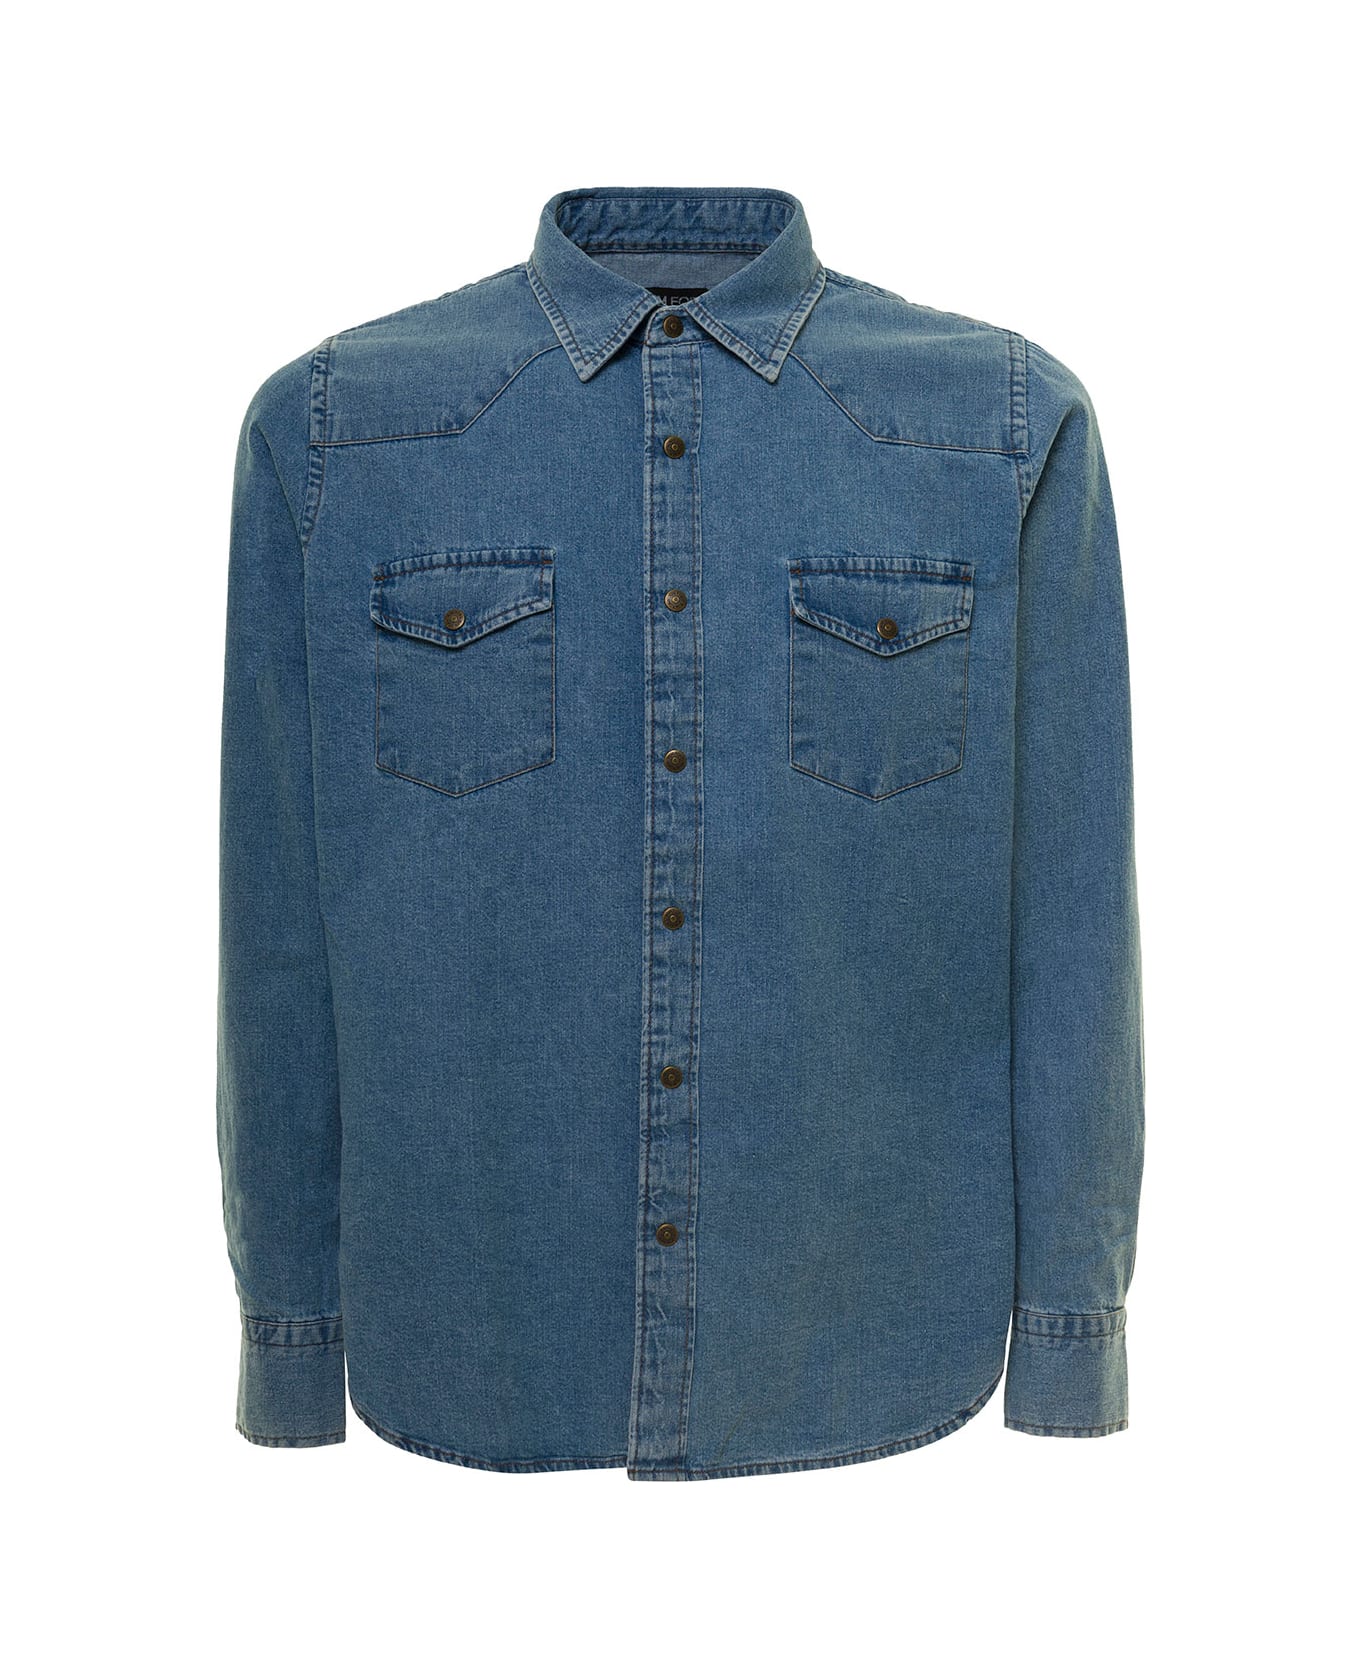 Tom Ford Blue Denim Shirt With Patch Pockets In Cotton Man - Blu